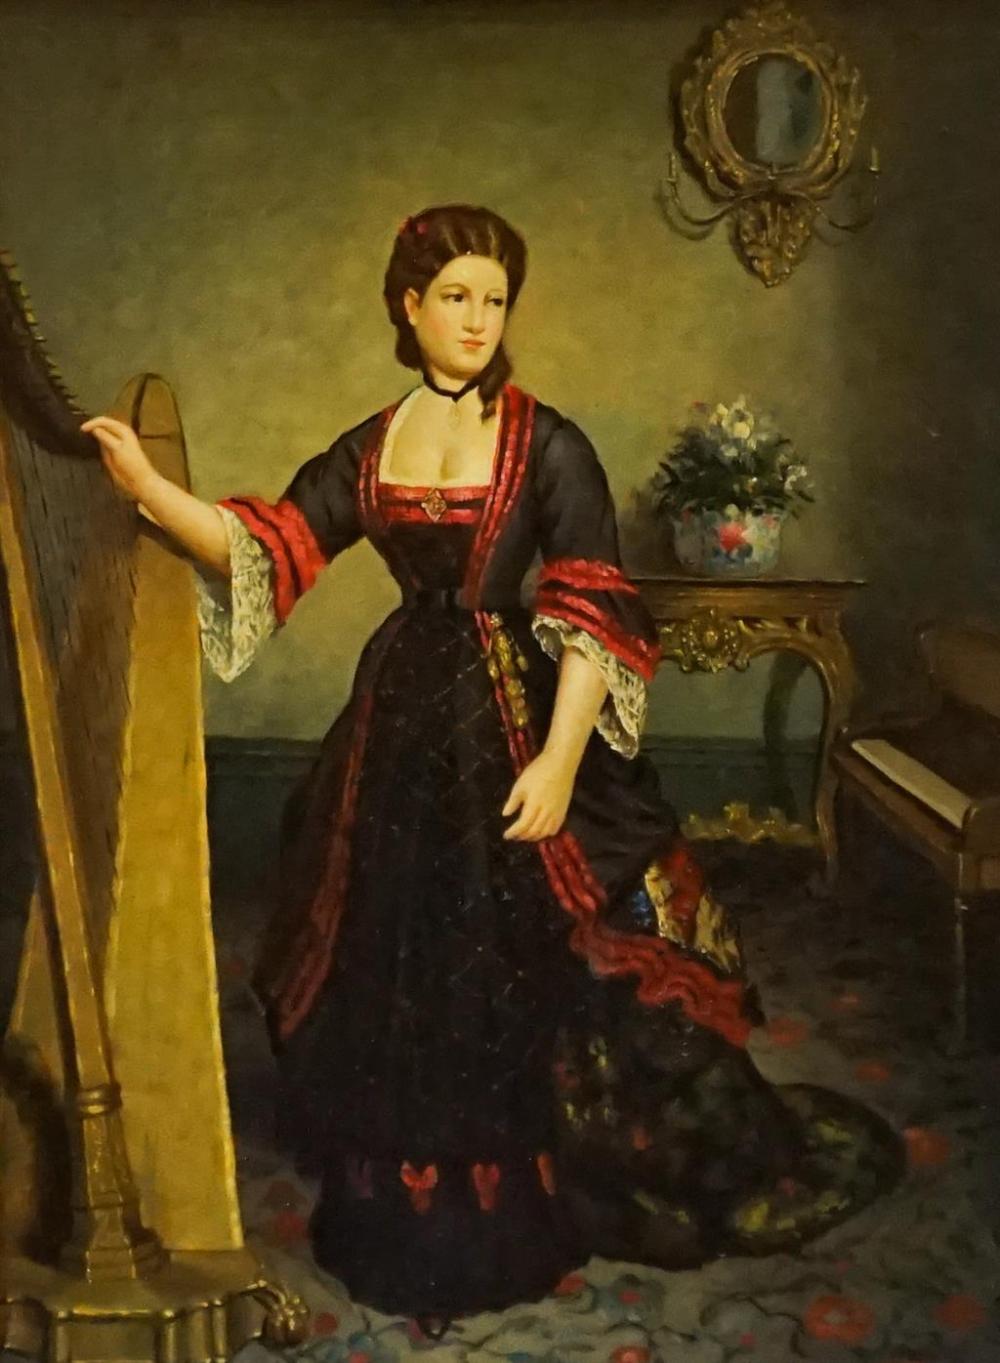 LADY IN MUSIC ROOM, LACQUER PRINT